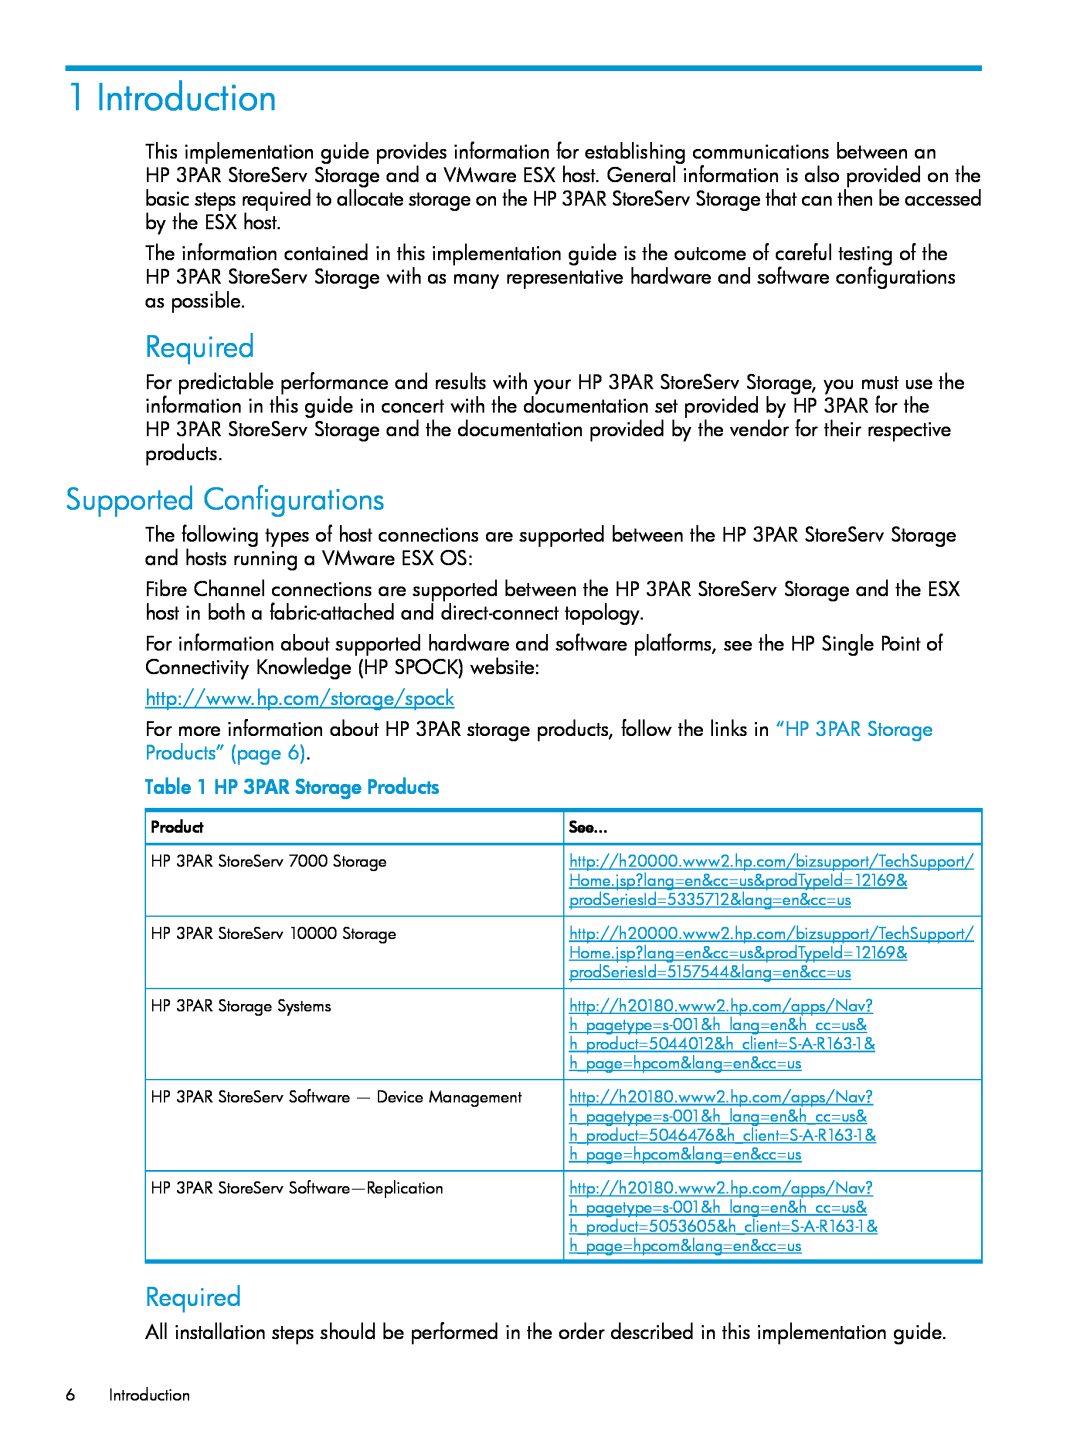 HP QR516B manual Introduction, Required, Supported Configurations, HP 3PAR Storage Products 